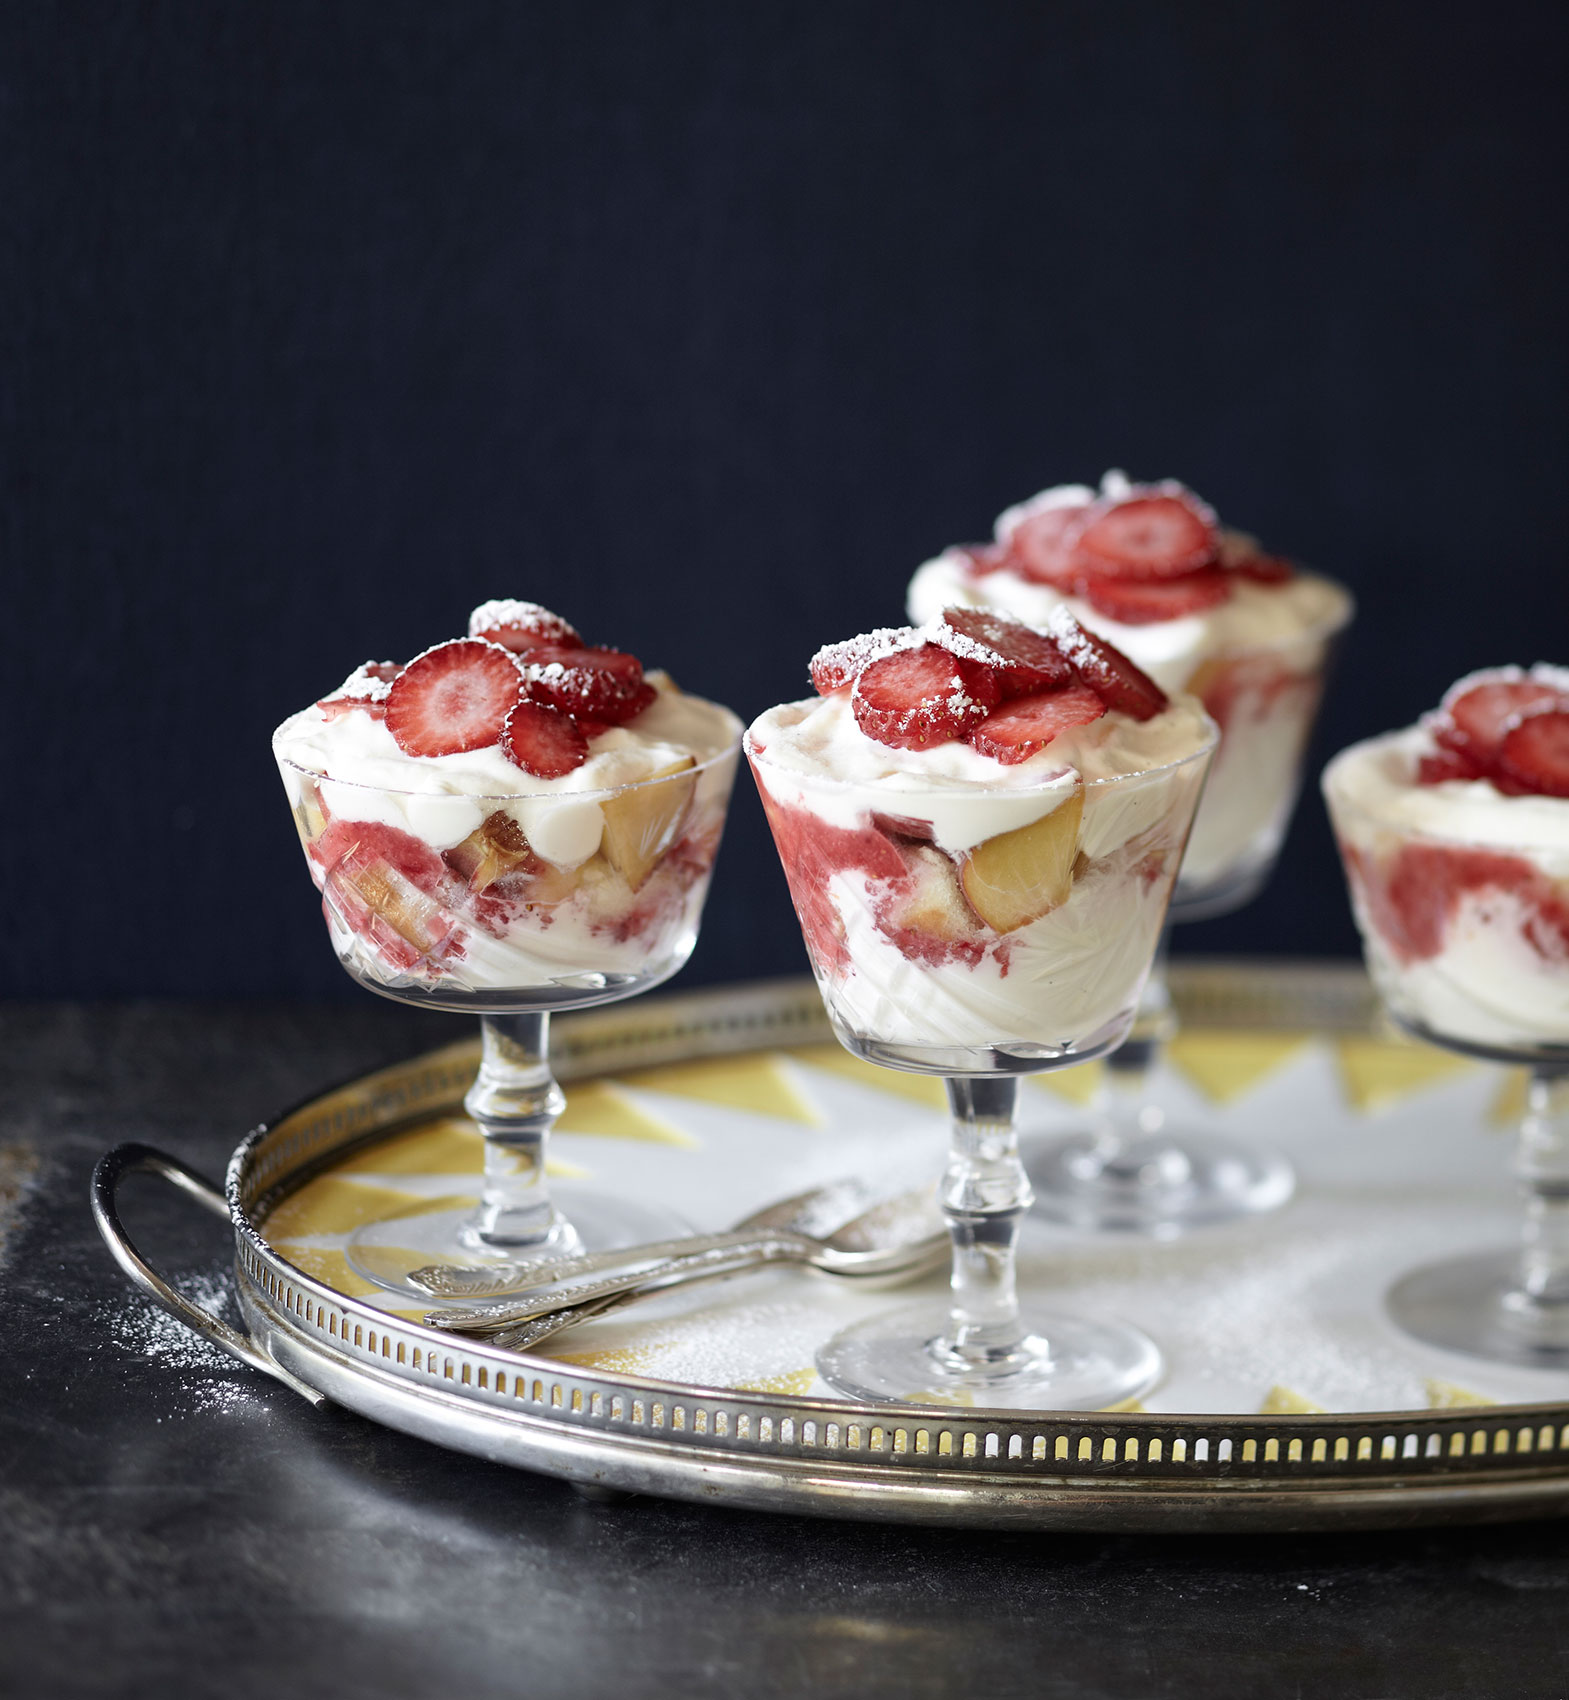 Everyday • Phoney Trifles Topped with Strawberries in Crystal Glasses • Hospitality & Editorial Food Photography